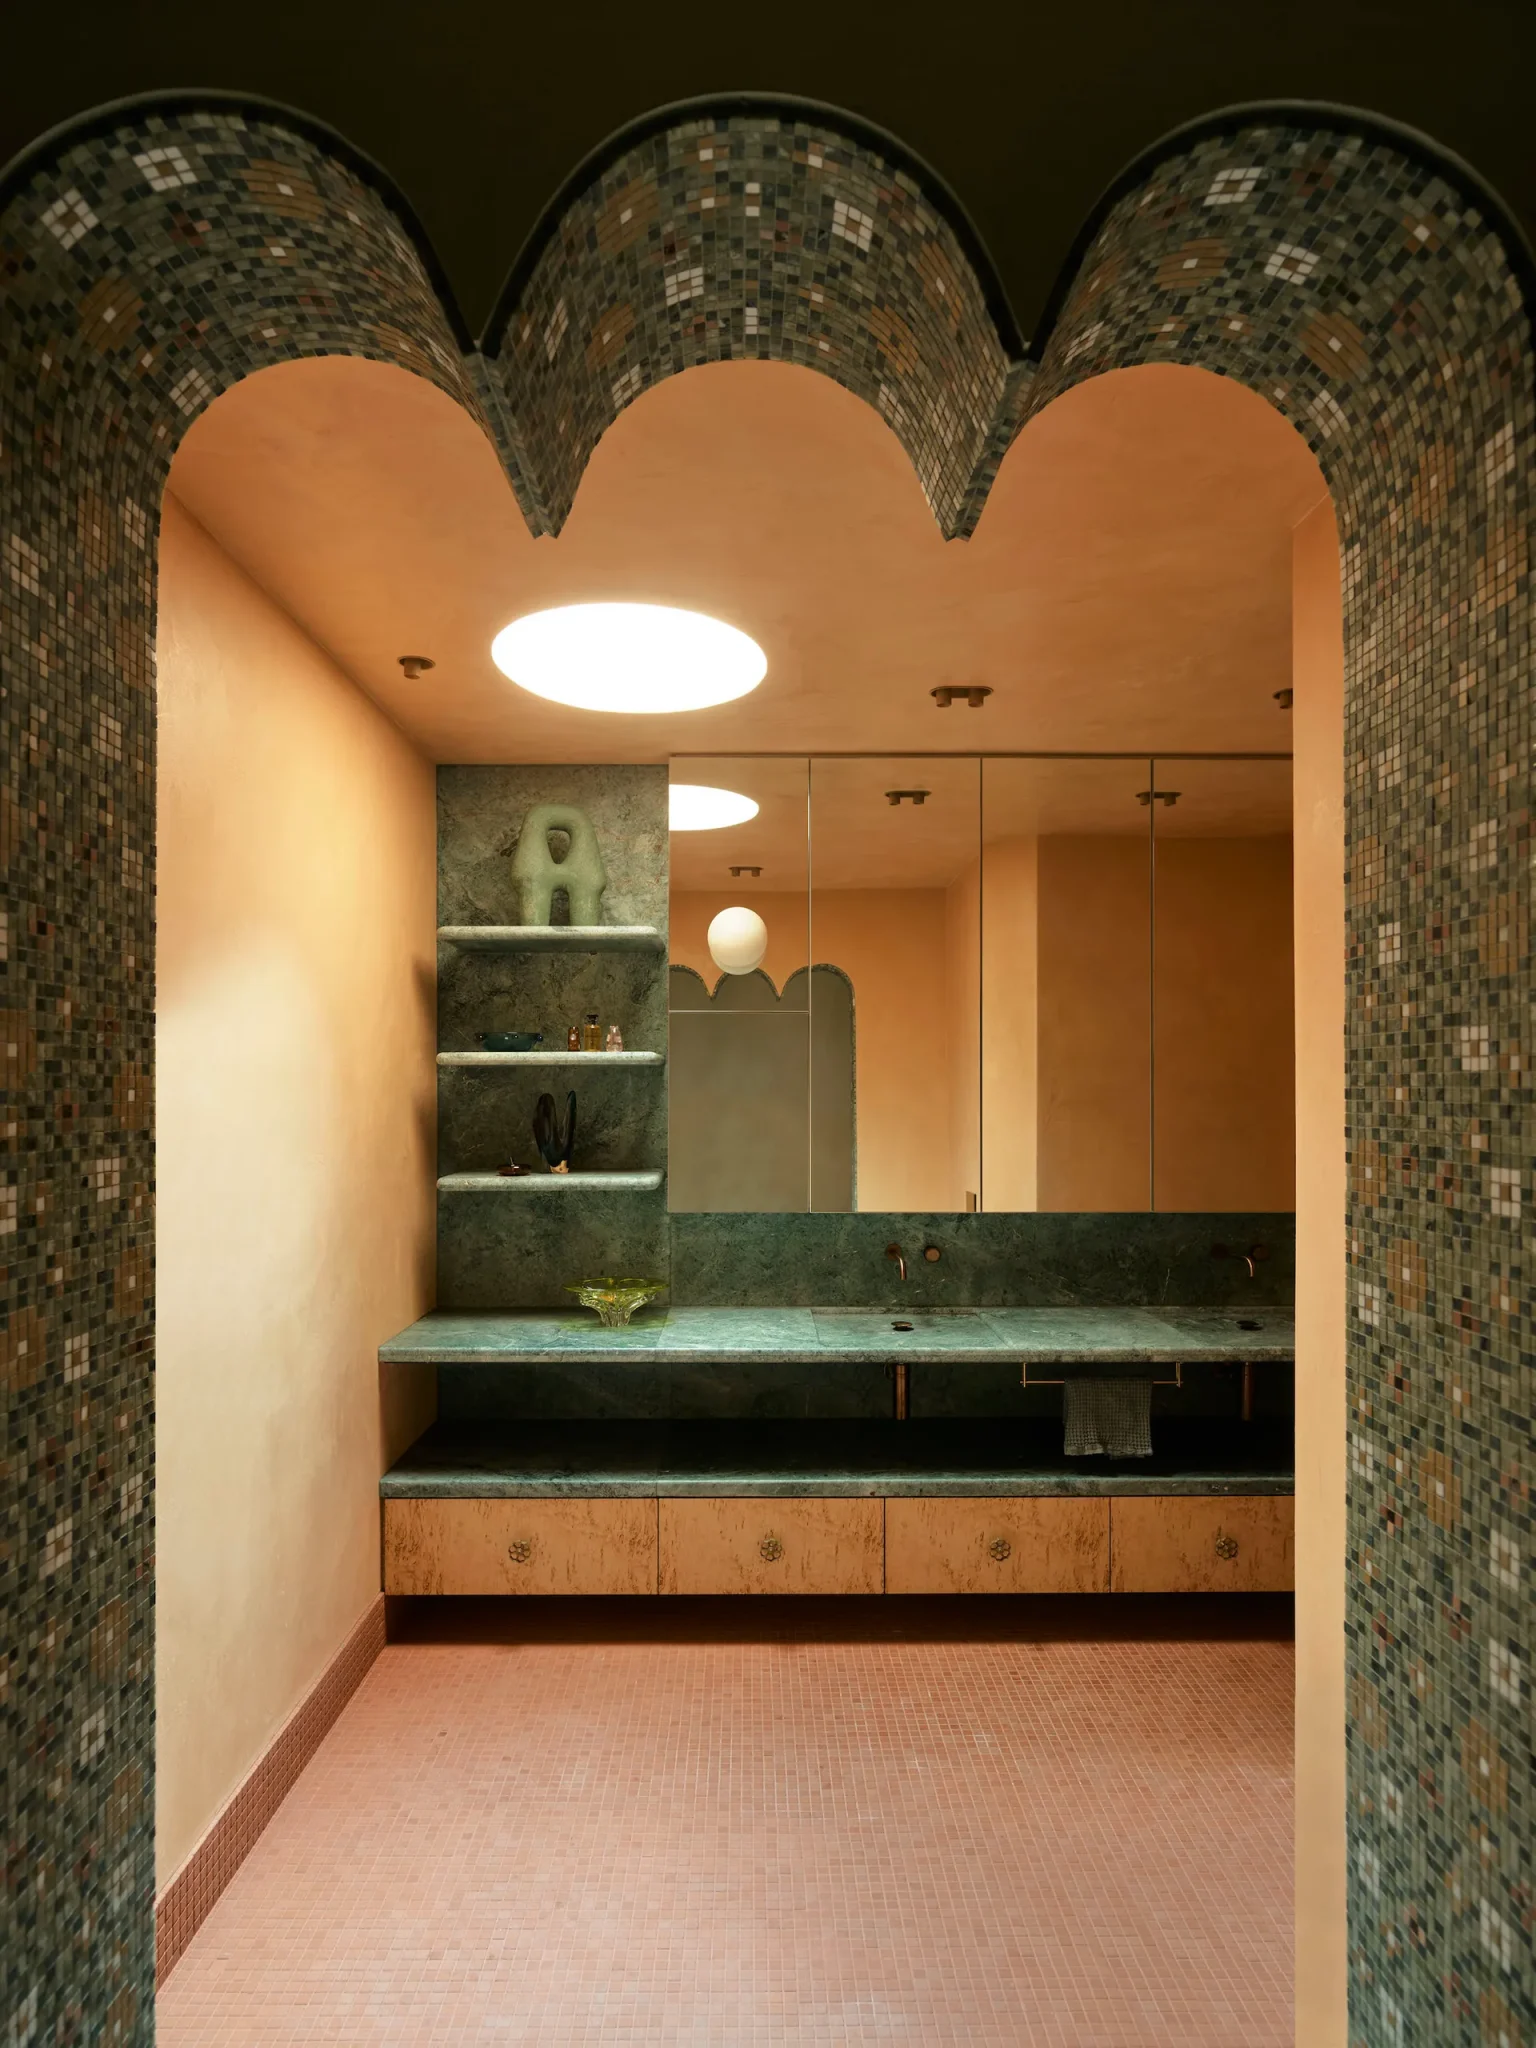 Bathroom addorned with terracota tile floring and green tile walls